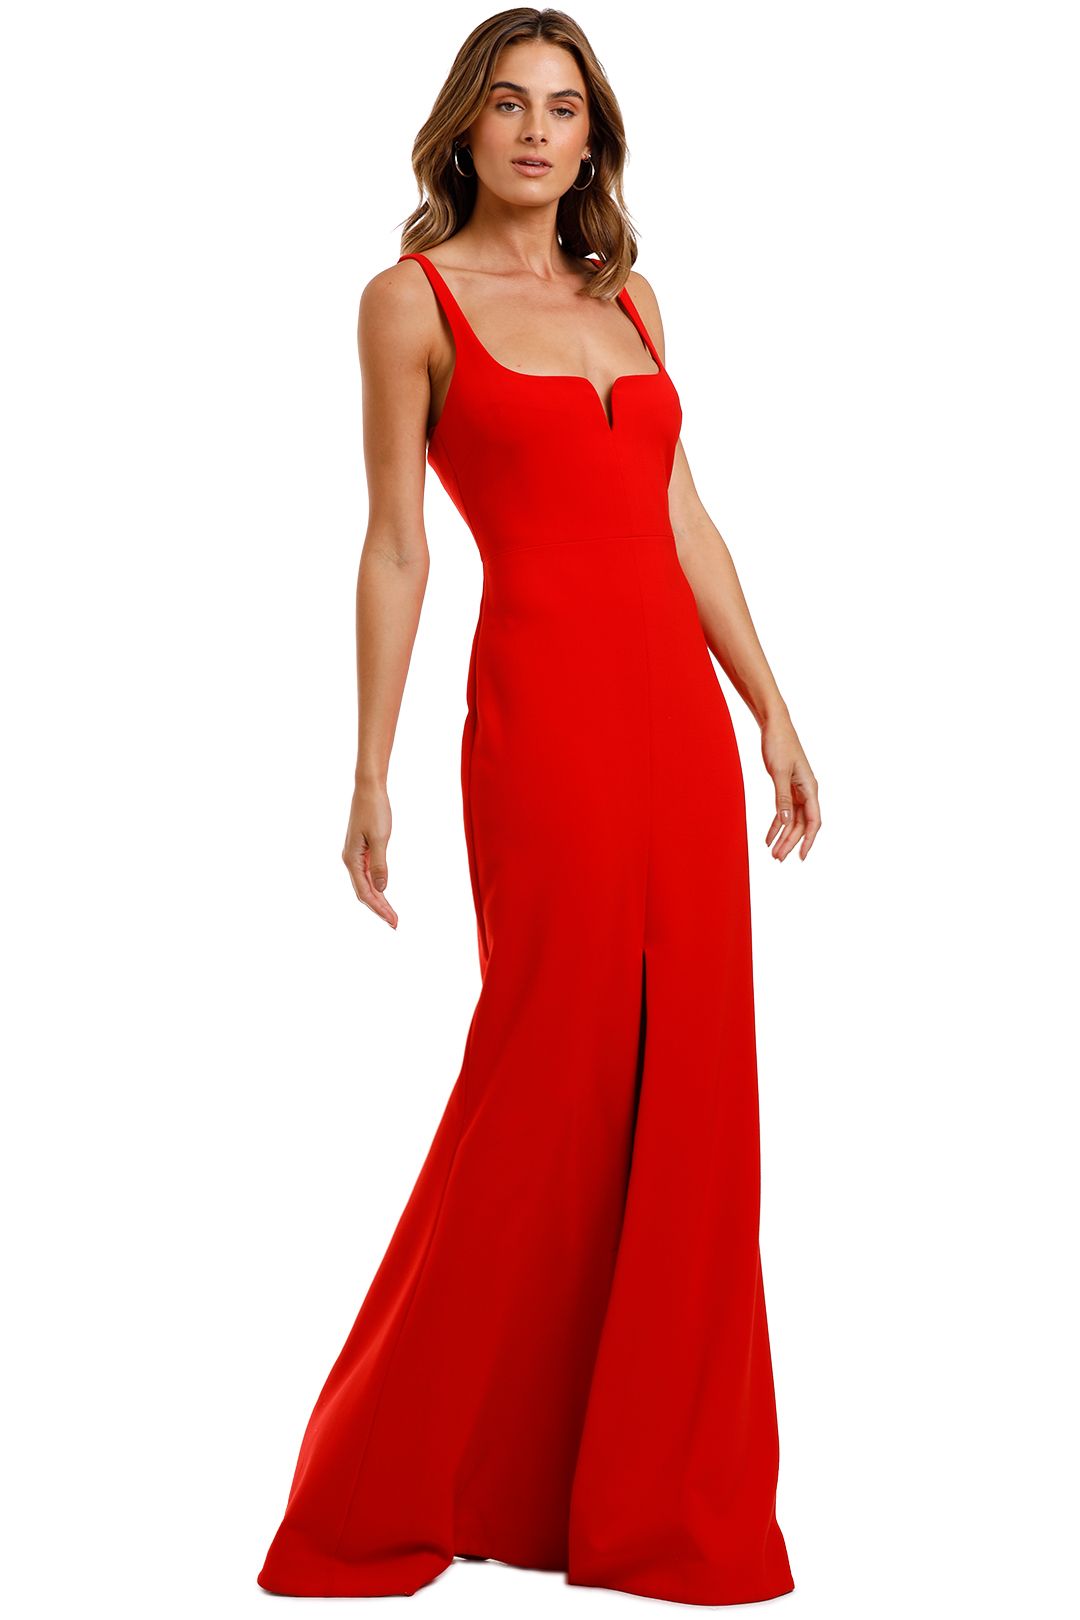 Likely NYC Constance Gown Scarlet Floor Length